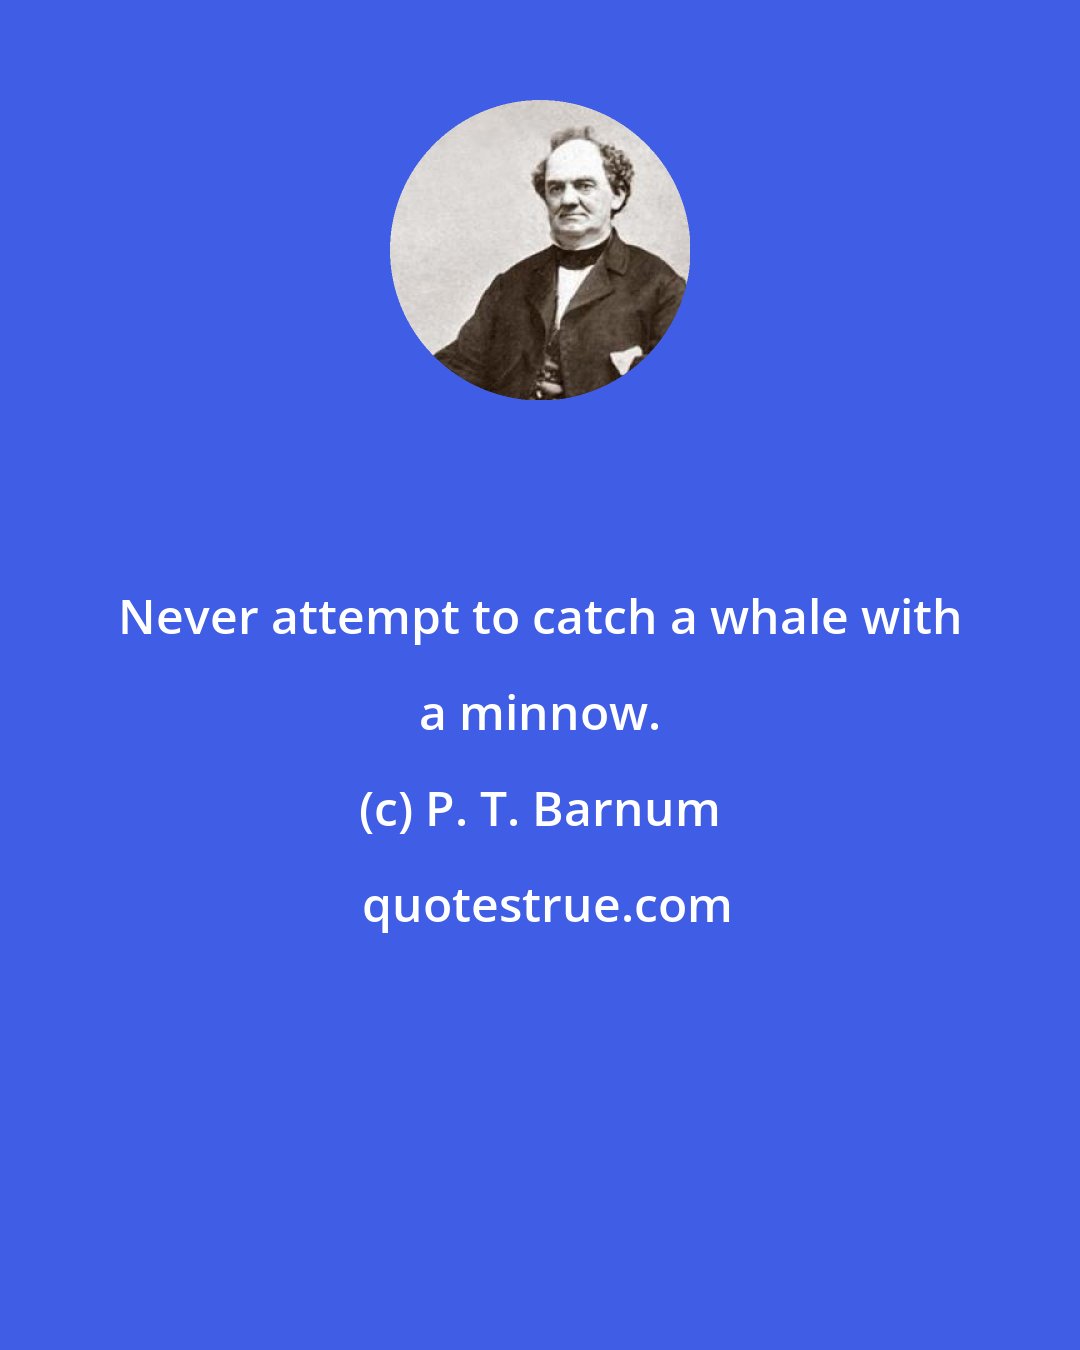 P. T. Barnum: Never attempt to catch a whale with a minnow.